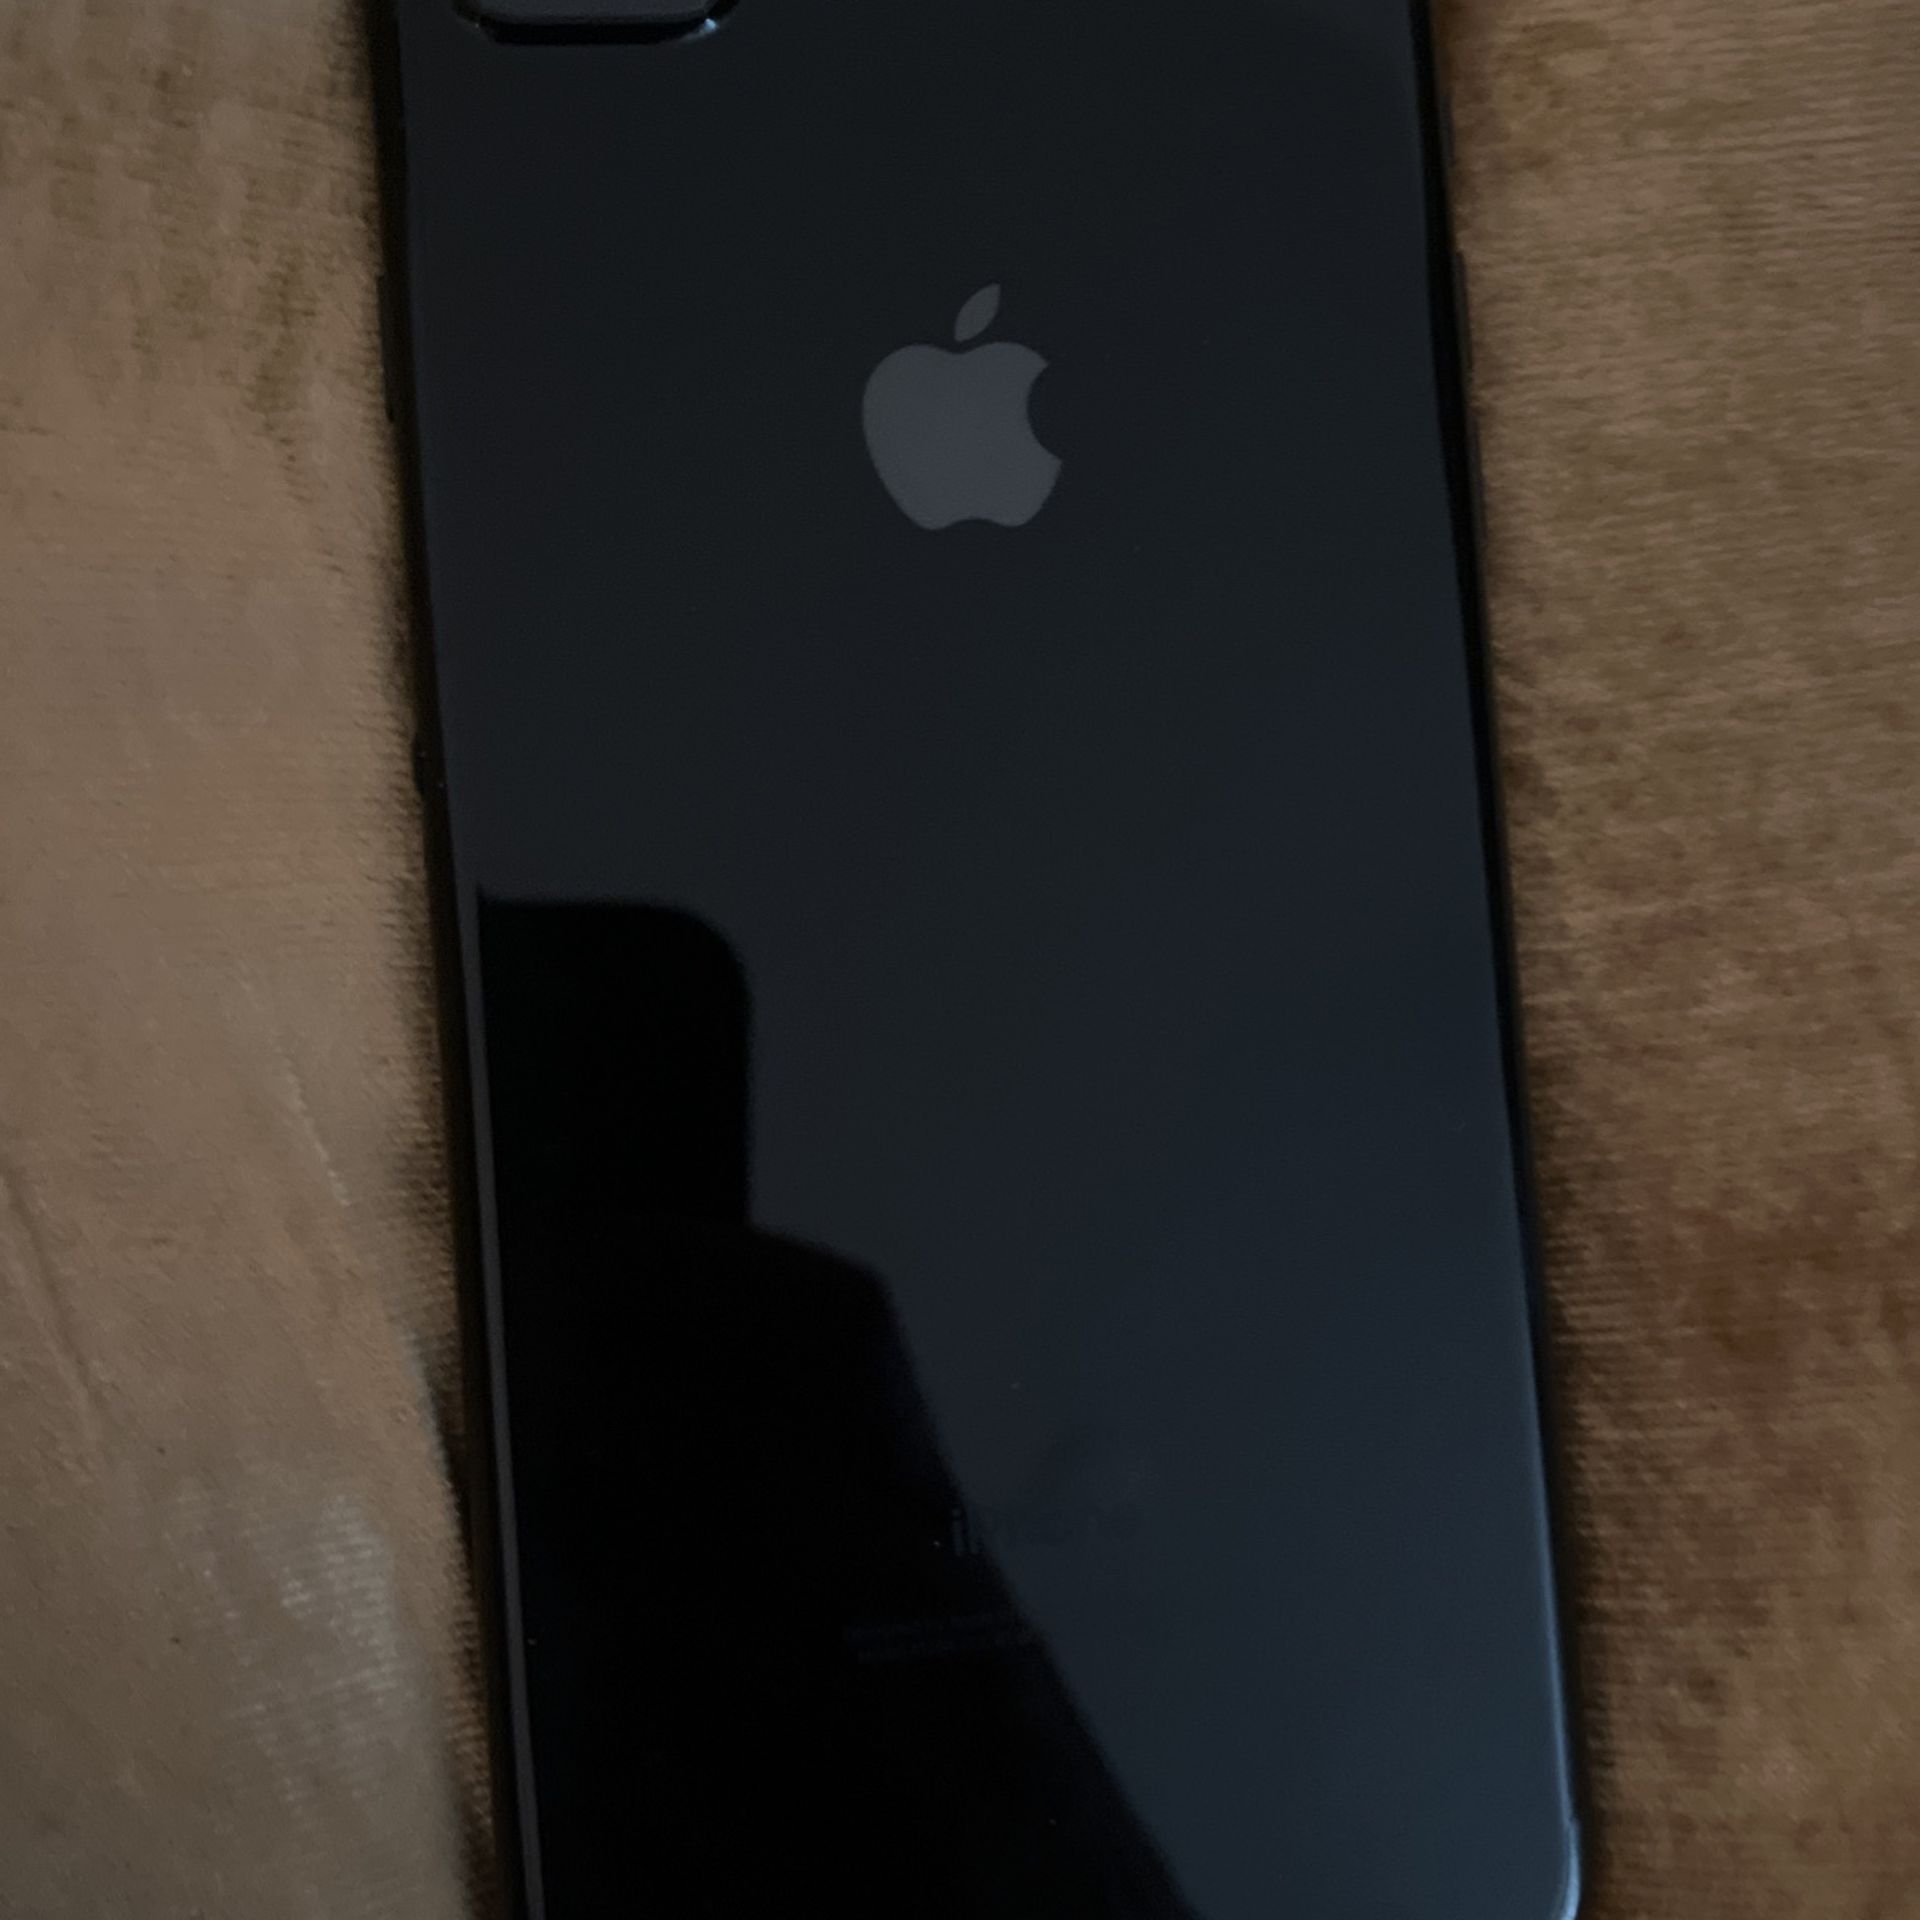 Apple iPhone 7 Plus (256gb AT&T Or Cricket) Black Color Good Condition 